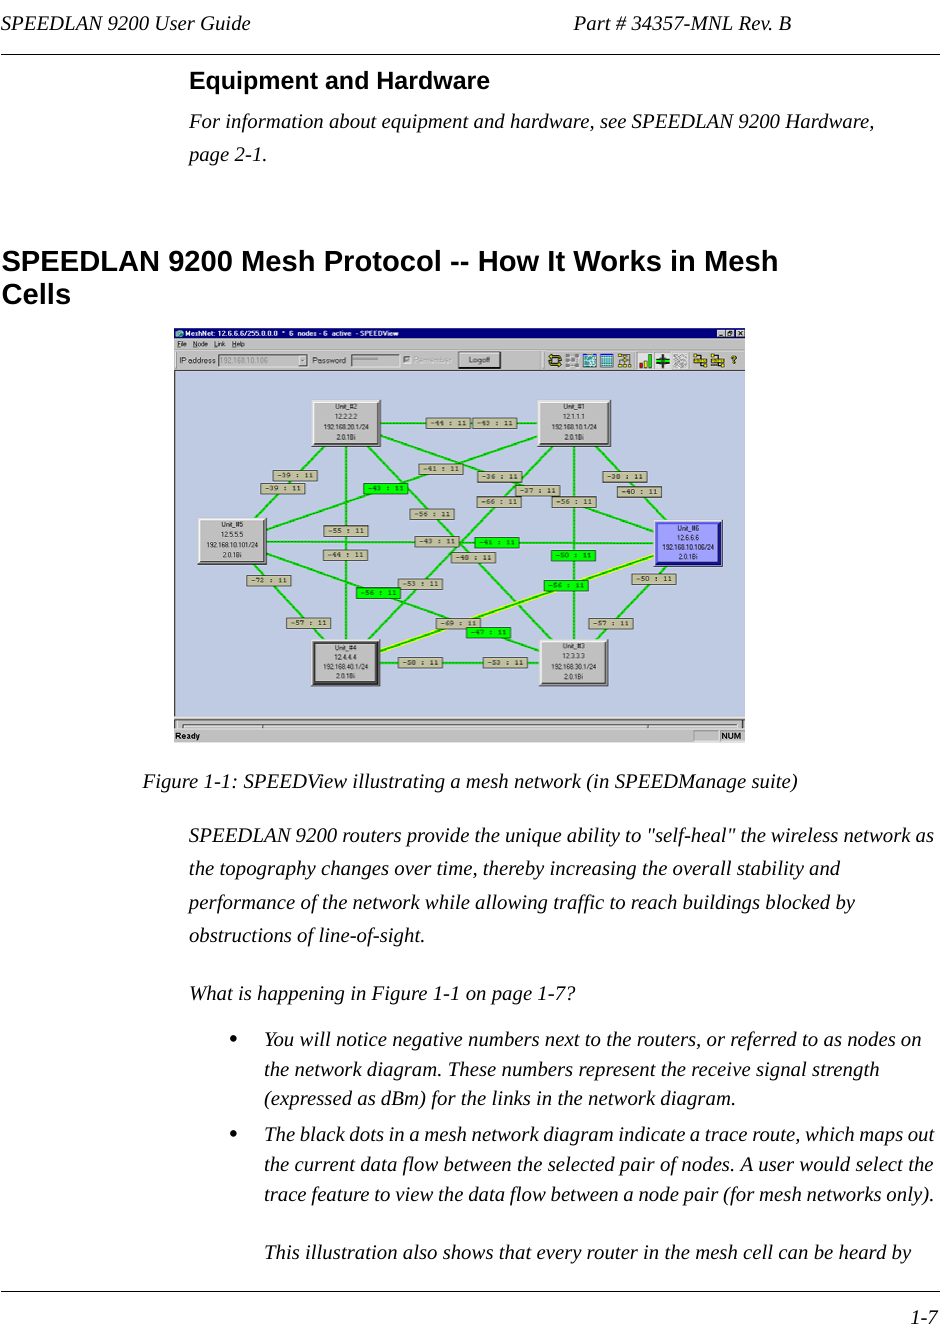 SPEEDLAN 9200 User Guide                                                              Part # 34357-MNL Rev. B      1-7                                                                                                                                                              Equipment and HardwareFor information about equipment and hardware, see SPEEDLAN 9200 Hardware, page 2-1.SPEEDLAN 9200 Mesh Protocol -- How It Works in Mesh CellsFigure 1-1: SPEEDView illustrating a mesh network (in SPEEDManage suite)SPEEDLAN 9200 routers provide the unique ability to &quot;self-heal&quot; the wireless network as the topography changes over time, thereby increasing the overall stability and performance of the network while allowing traffic to reach buildings blocked by obstructions of line-of-sight. What is happening in Figure 1-1 on page 1-7?  •You will notice negative numbers next to the routers, or referred to as nodes on the network diagram. These numbers represent the receive signal strength (expressed as dBm) for the links in the network diagram. •The black dots in a mesh network diagram indicate a trace route, which maps out the current data flow between the selected pair of nodes. A user would select the trace feature to view the data flow between a node pair (for mesh networks only). This illustration also shows that every router in the mesh cell can be heard by 